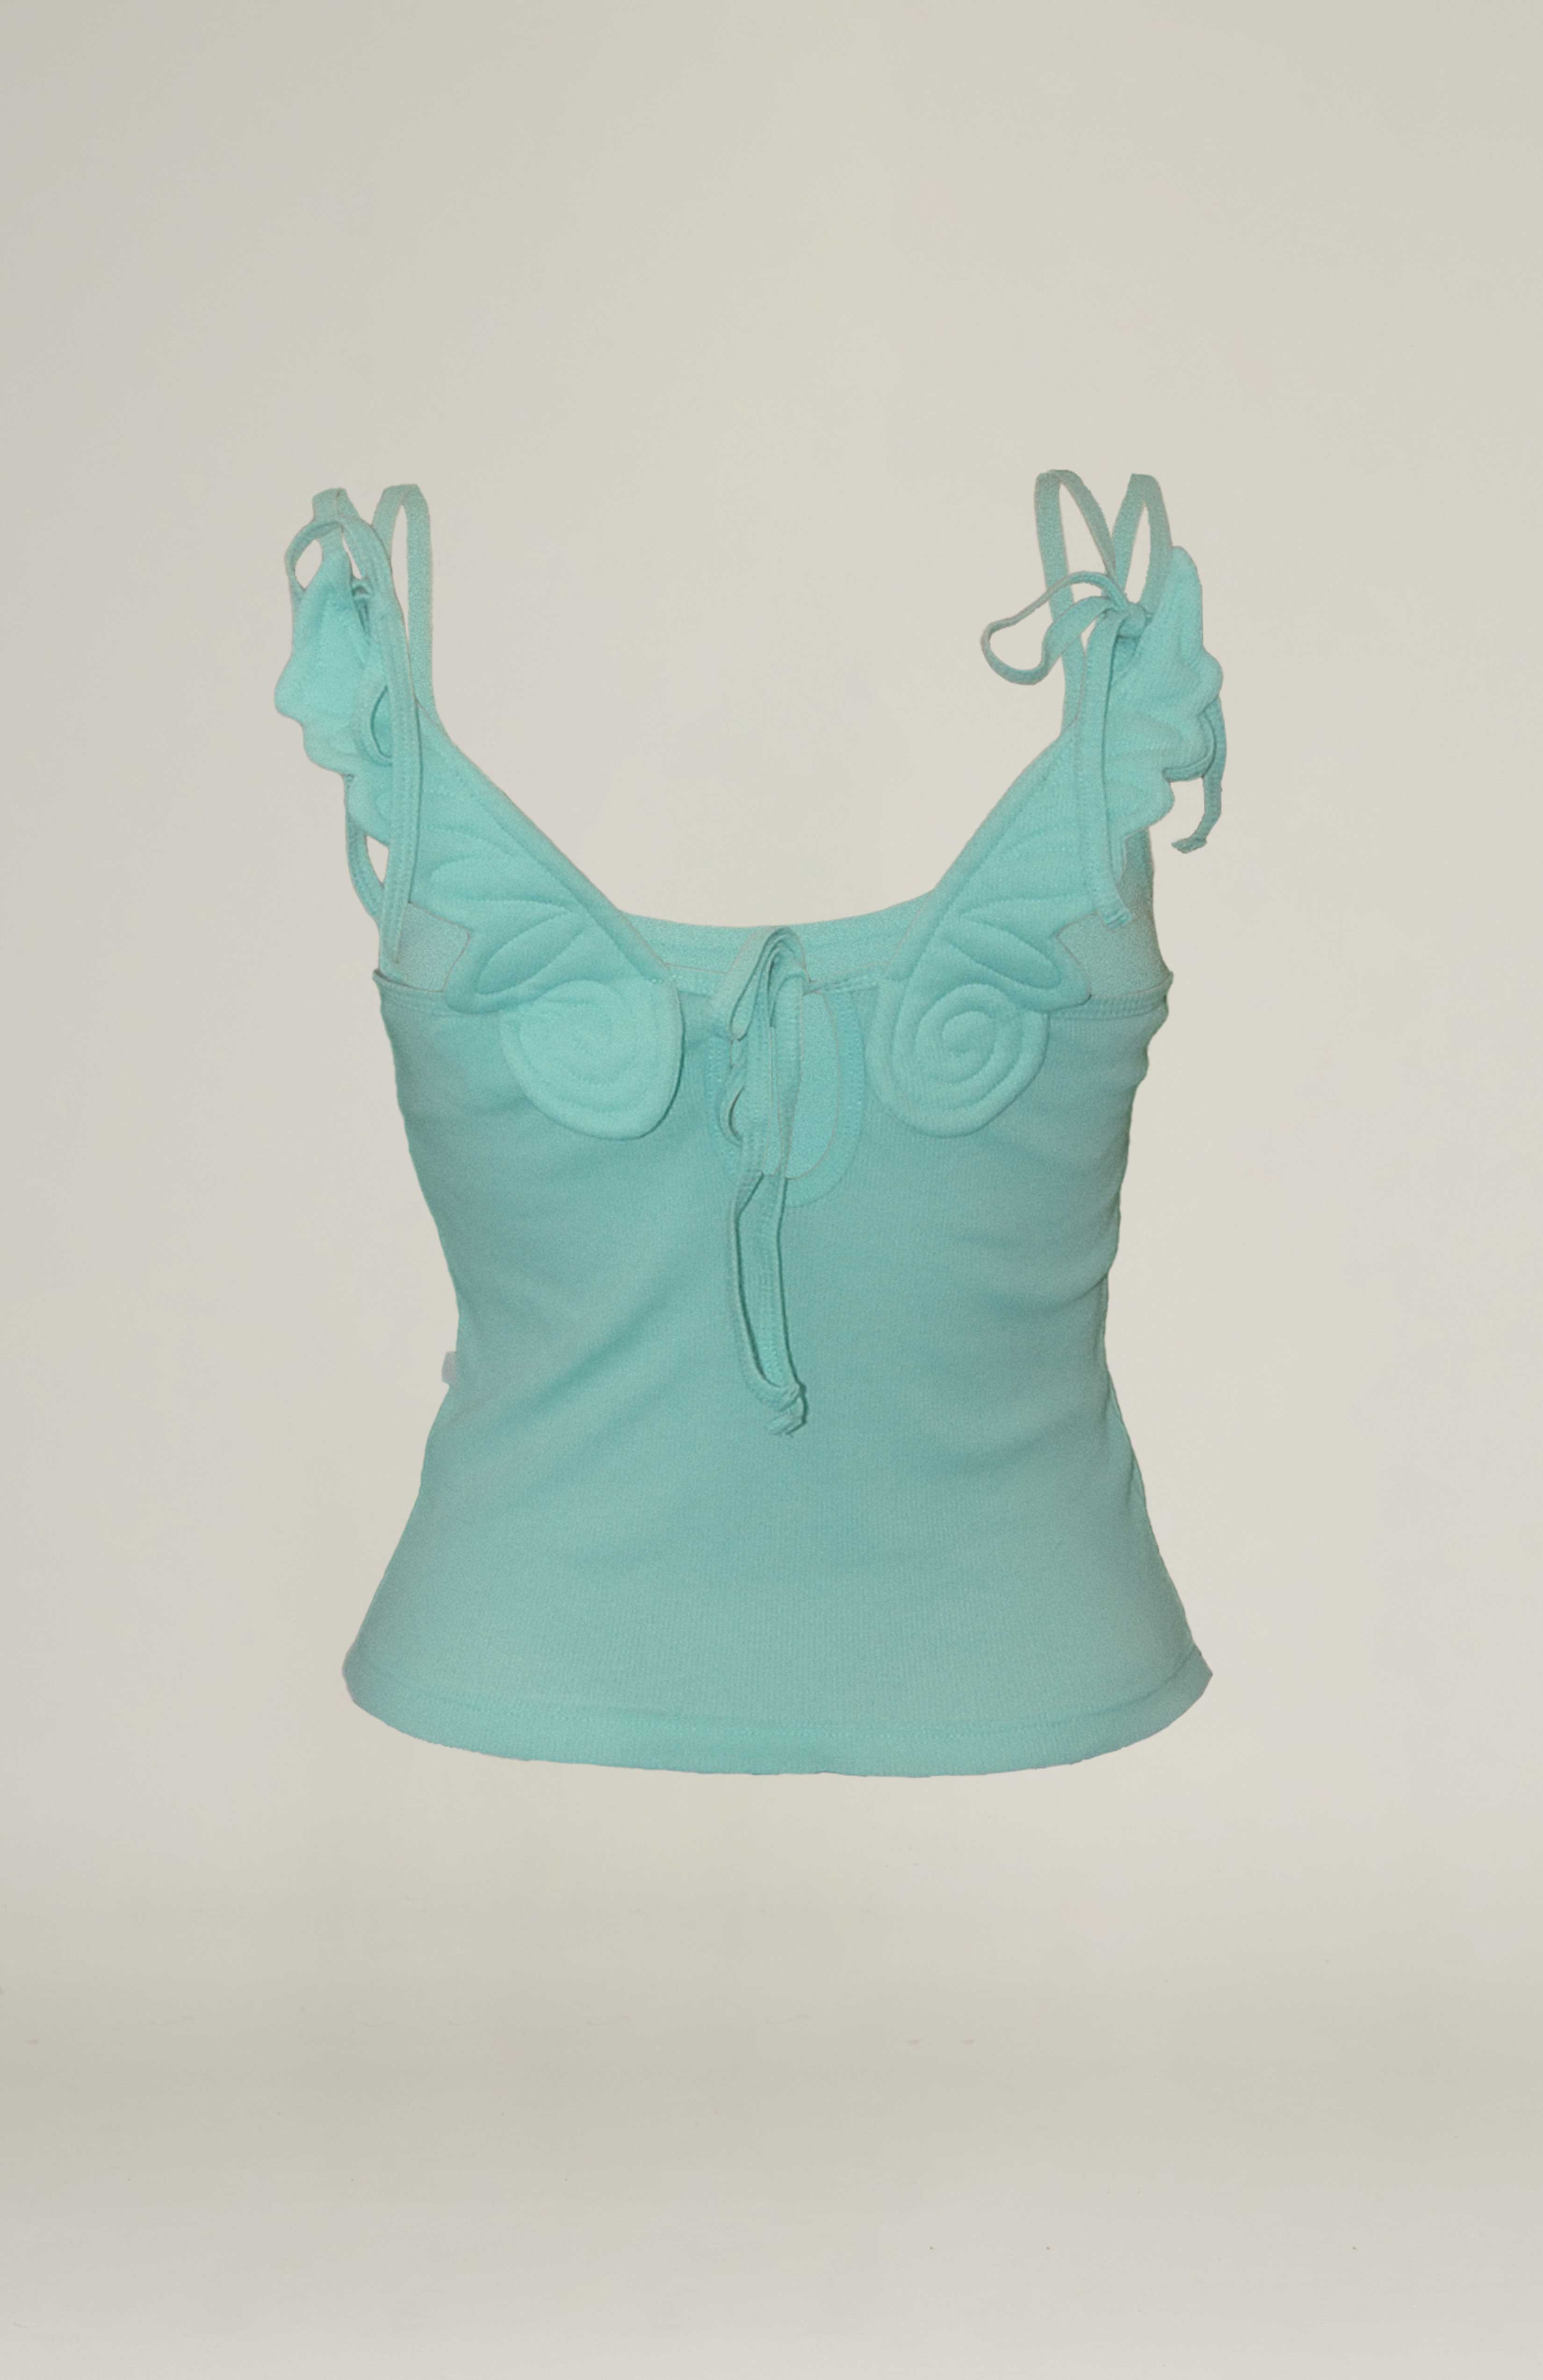 aqua mint green plushie anime angel wing camisole singlet with adjustable straps